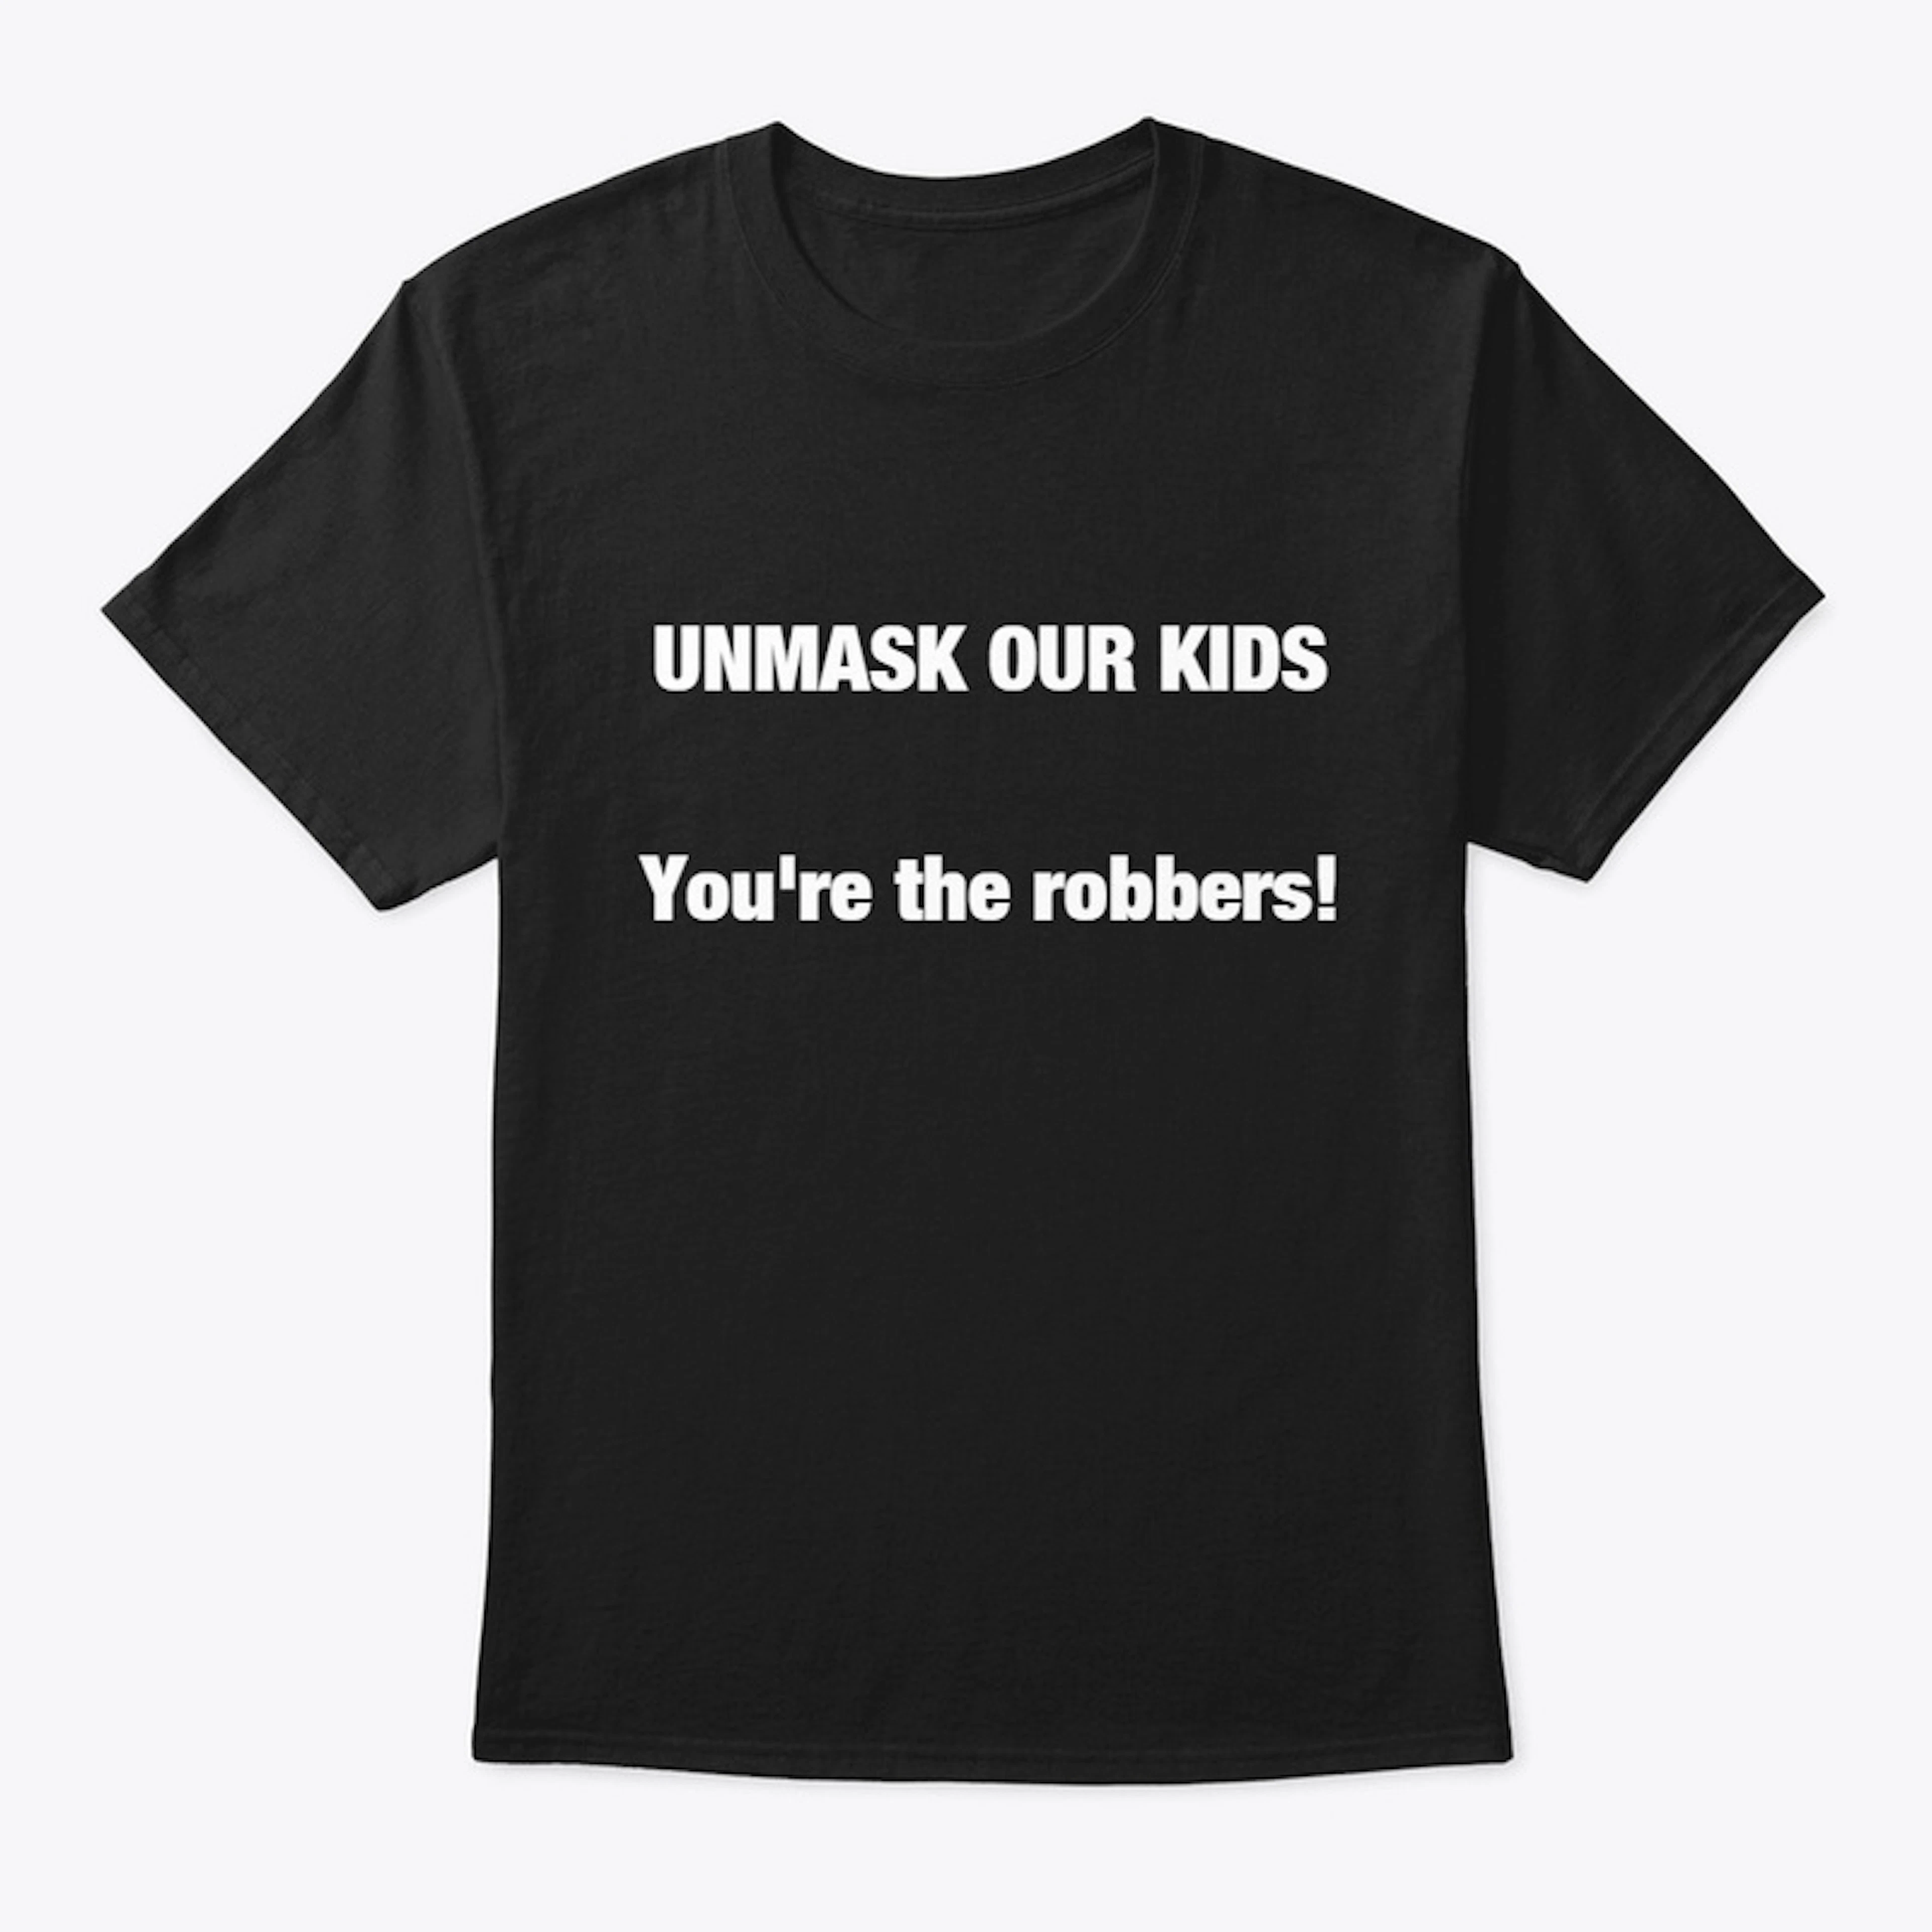 UNMASK OUR KIDS